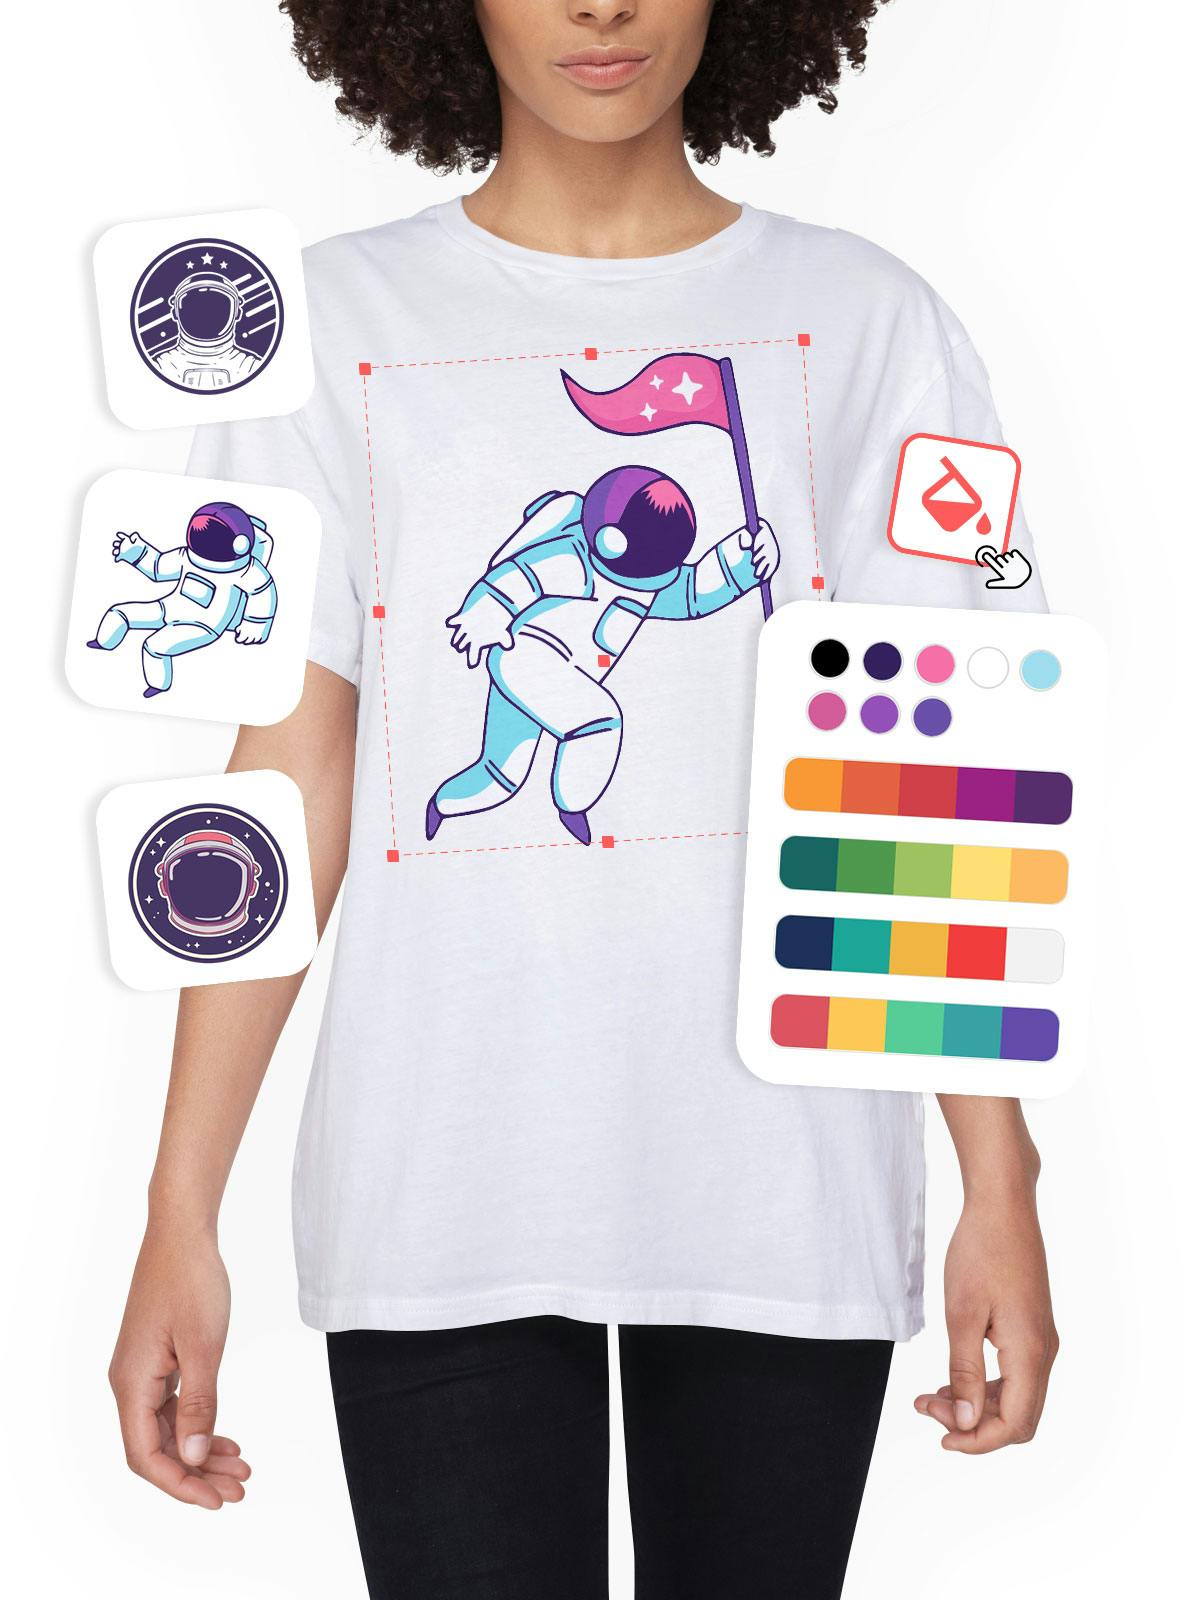 preview of t-shirt maker with graphics and color been selected